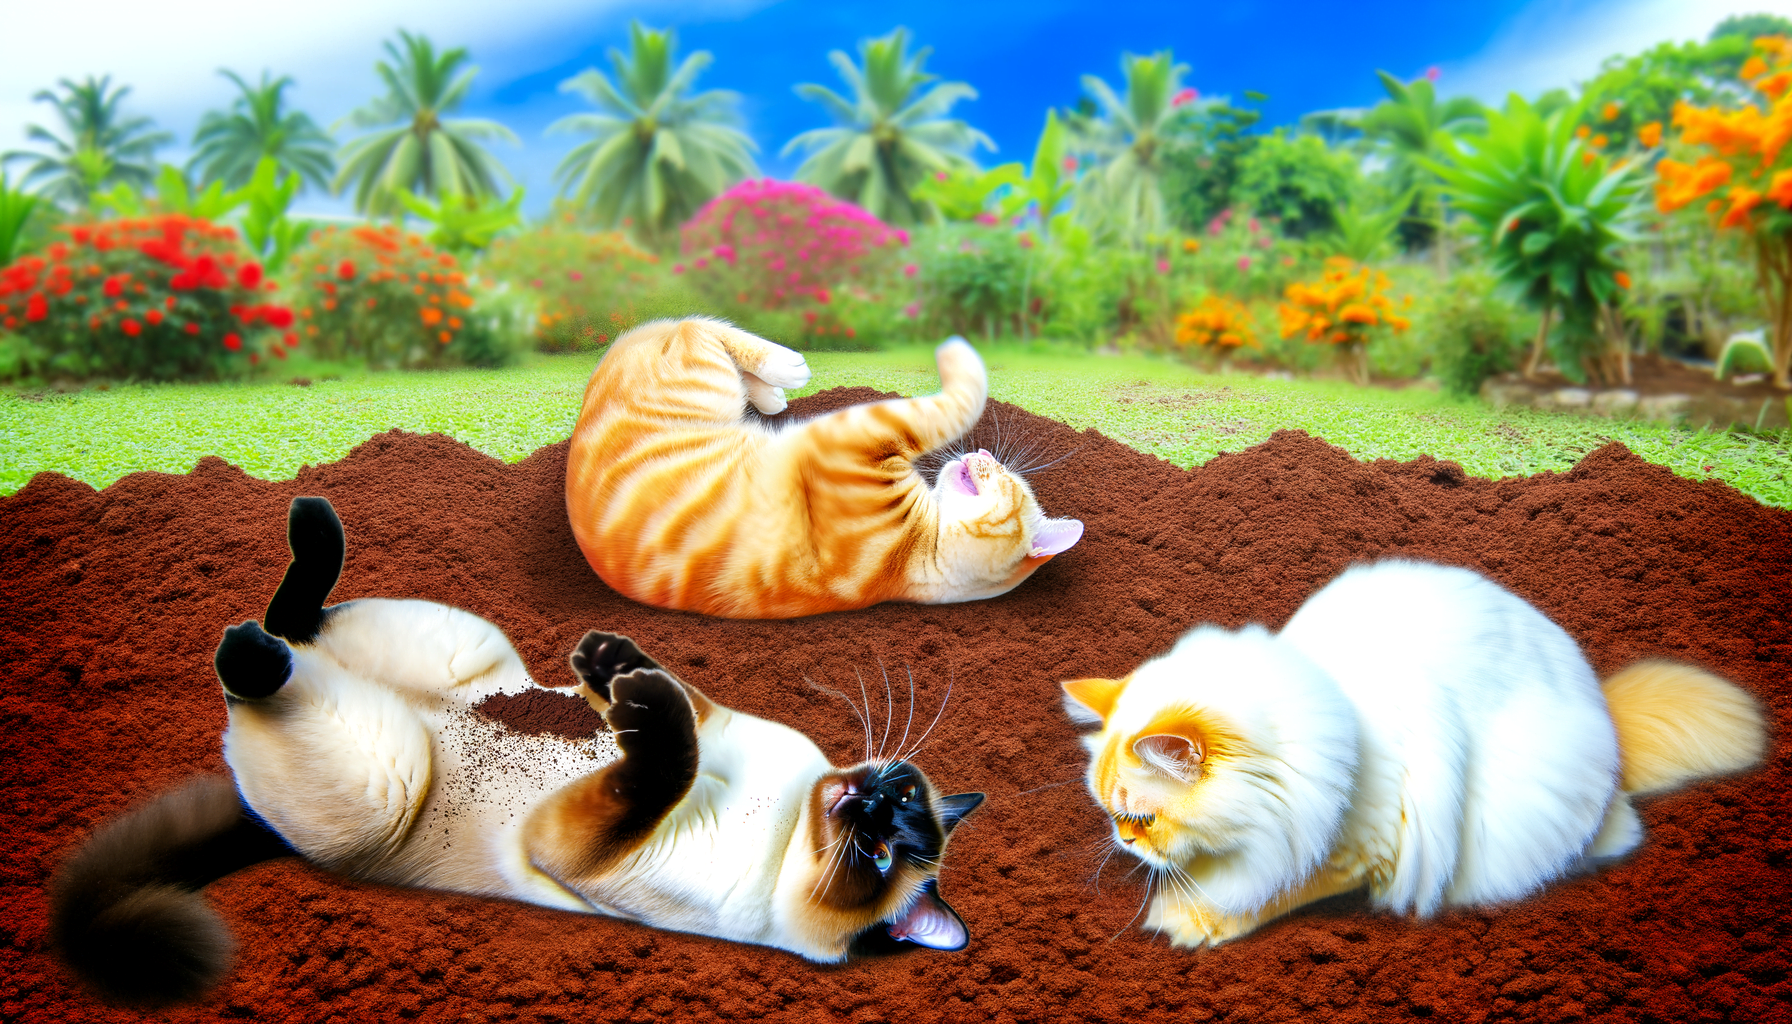 "Cracking the Mystery: Why Cats Love Rolling in the Dirt"